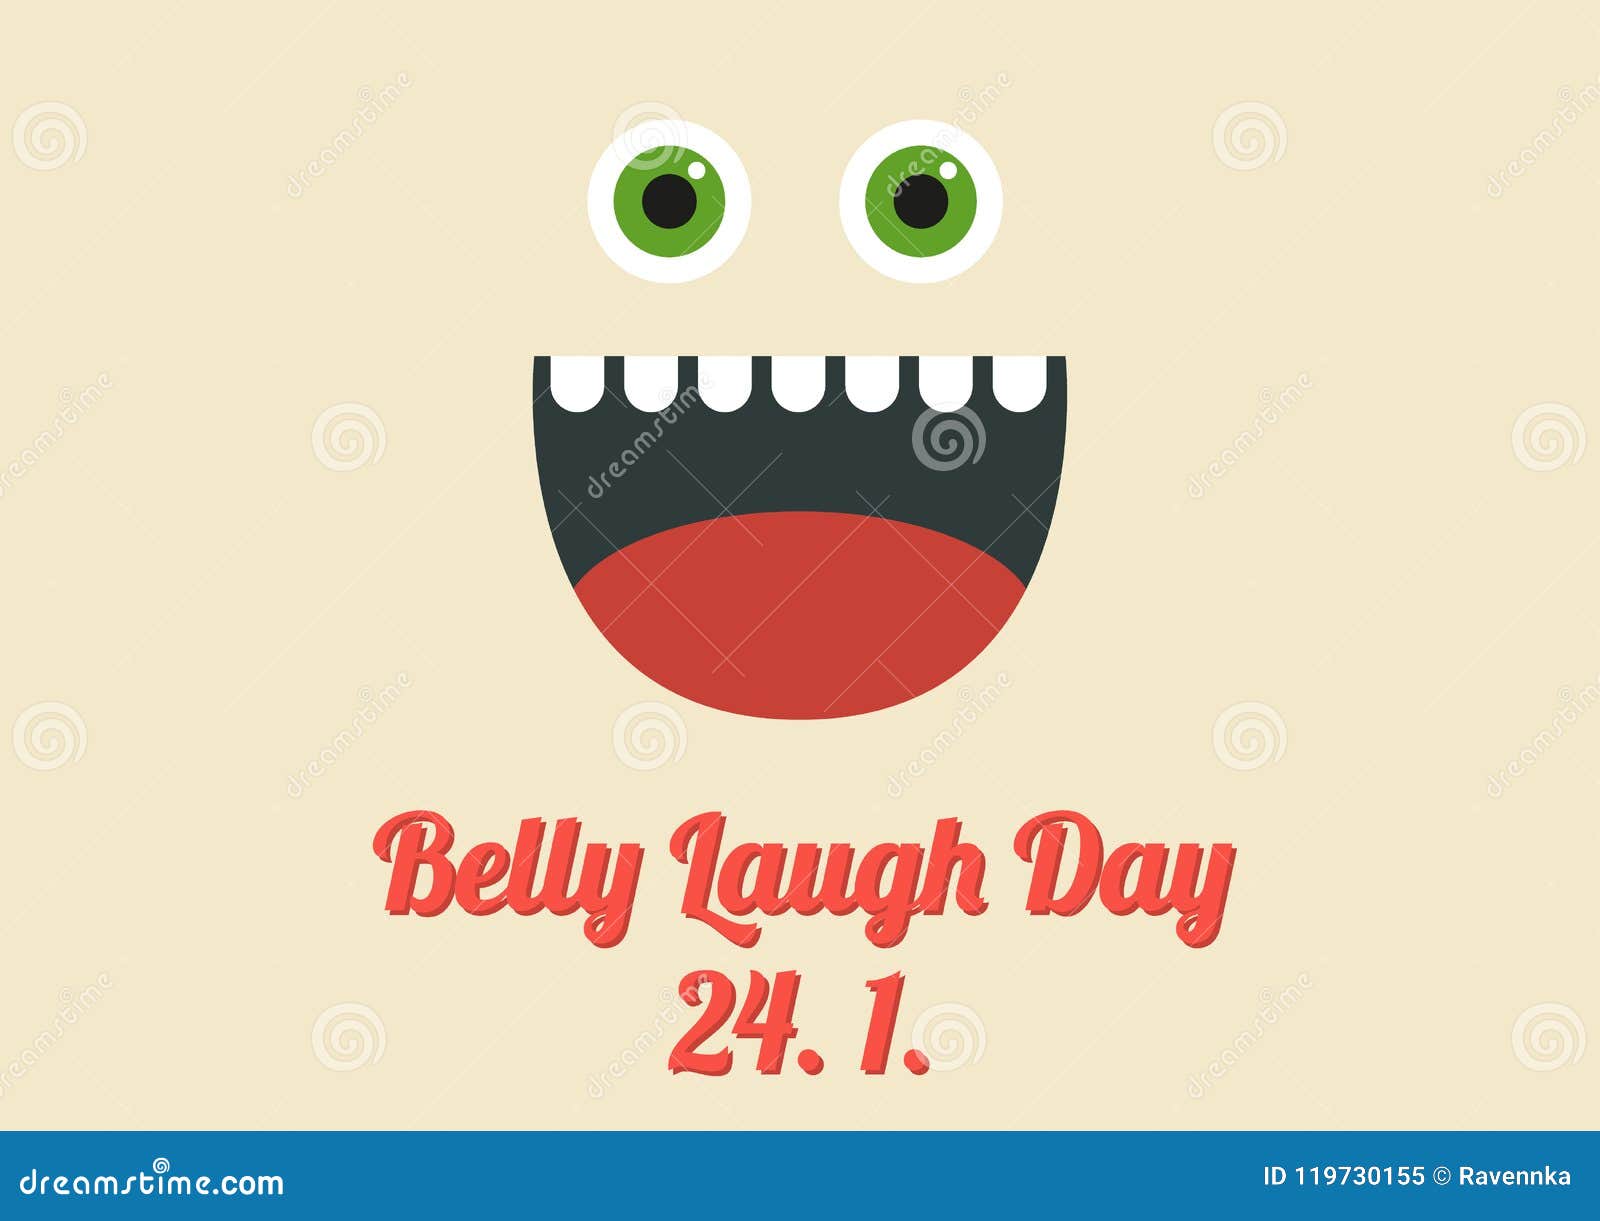 Free Clipart Of Belly Laugh Day 2022